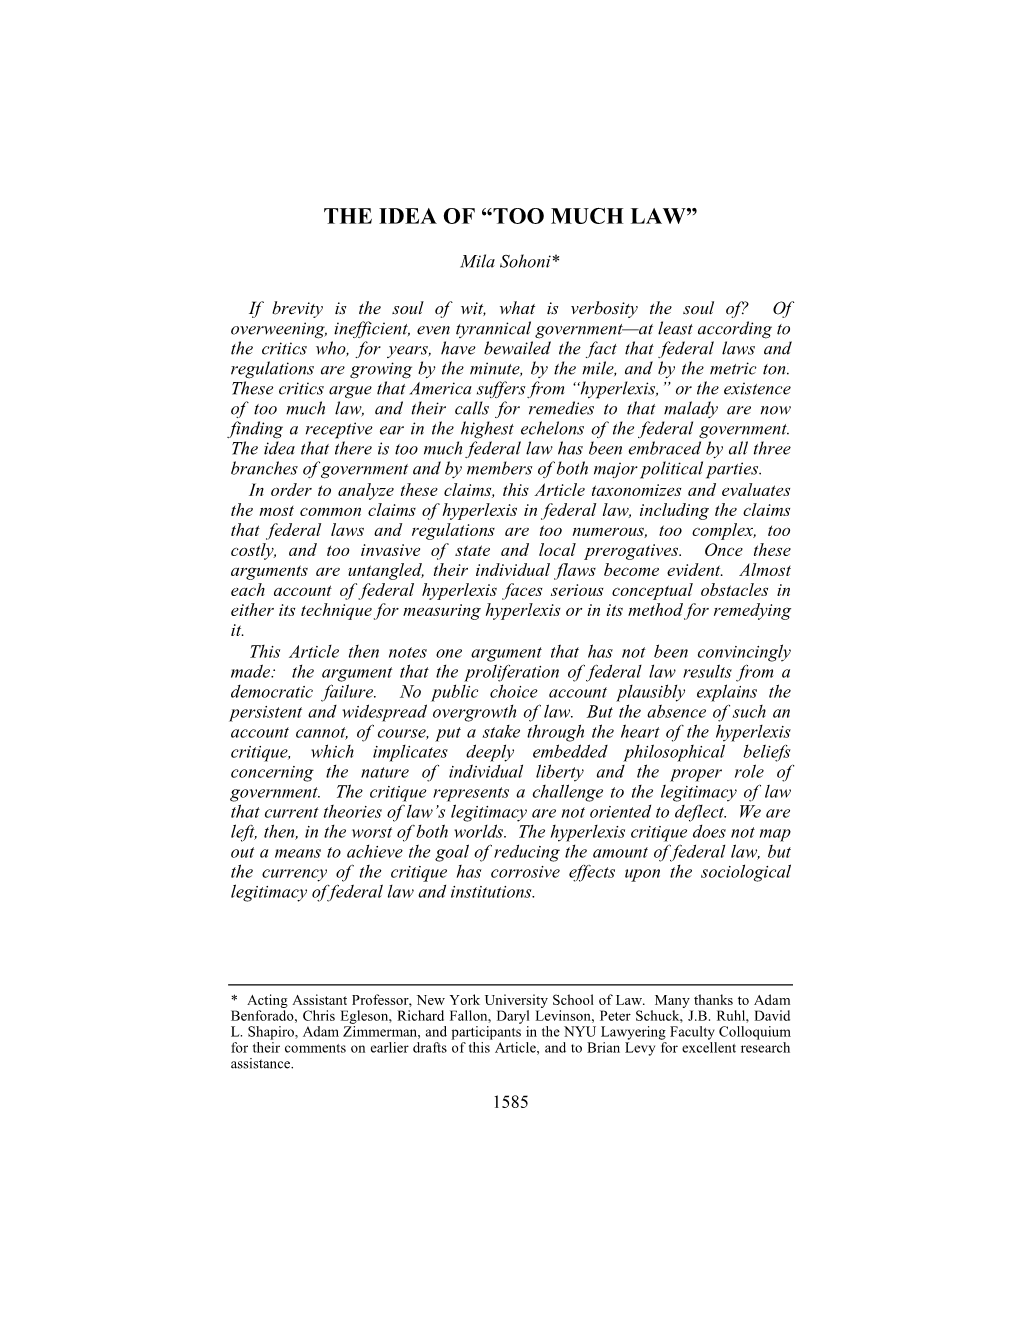 The Idea of “Too Much Law”